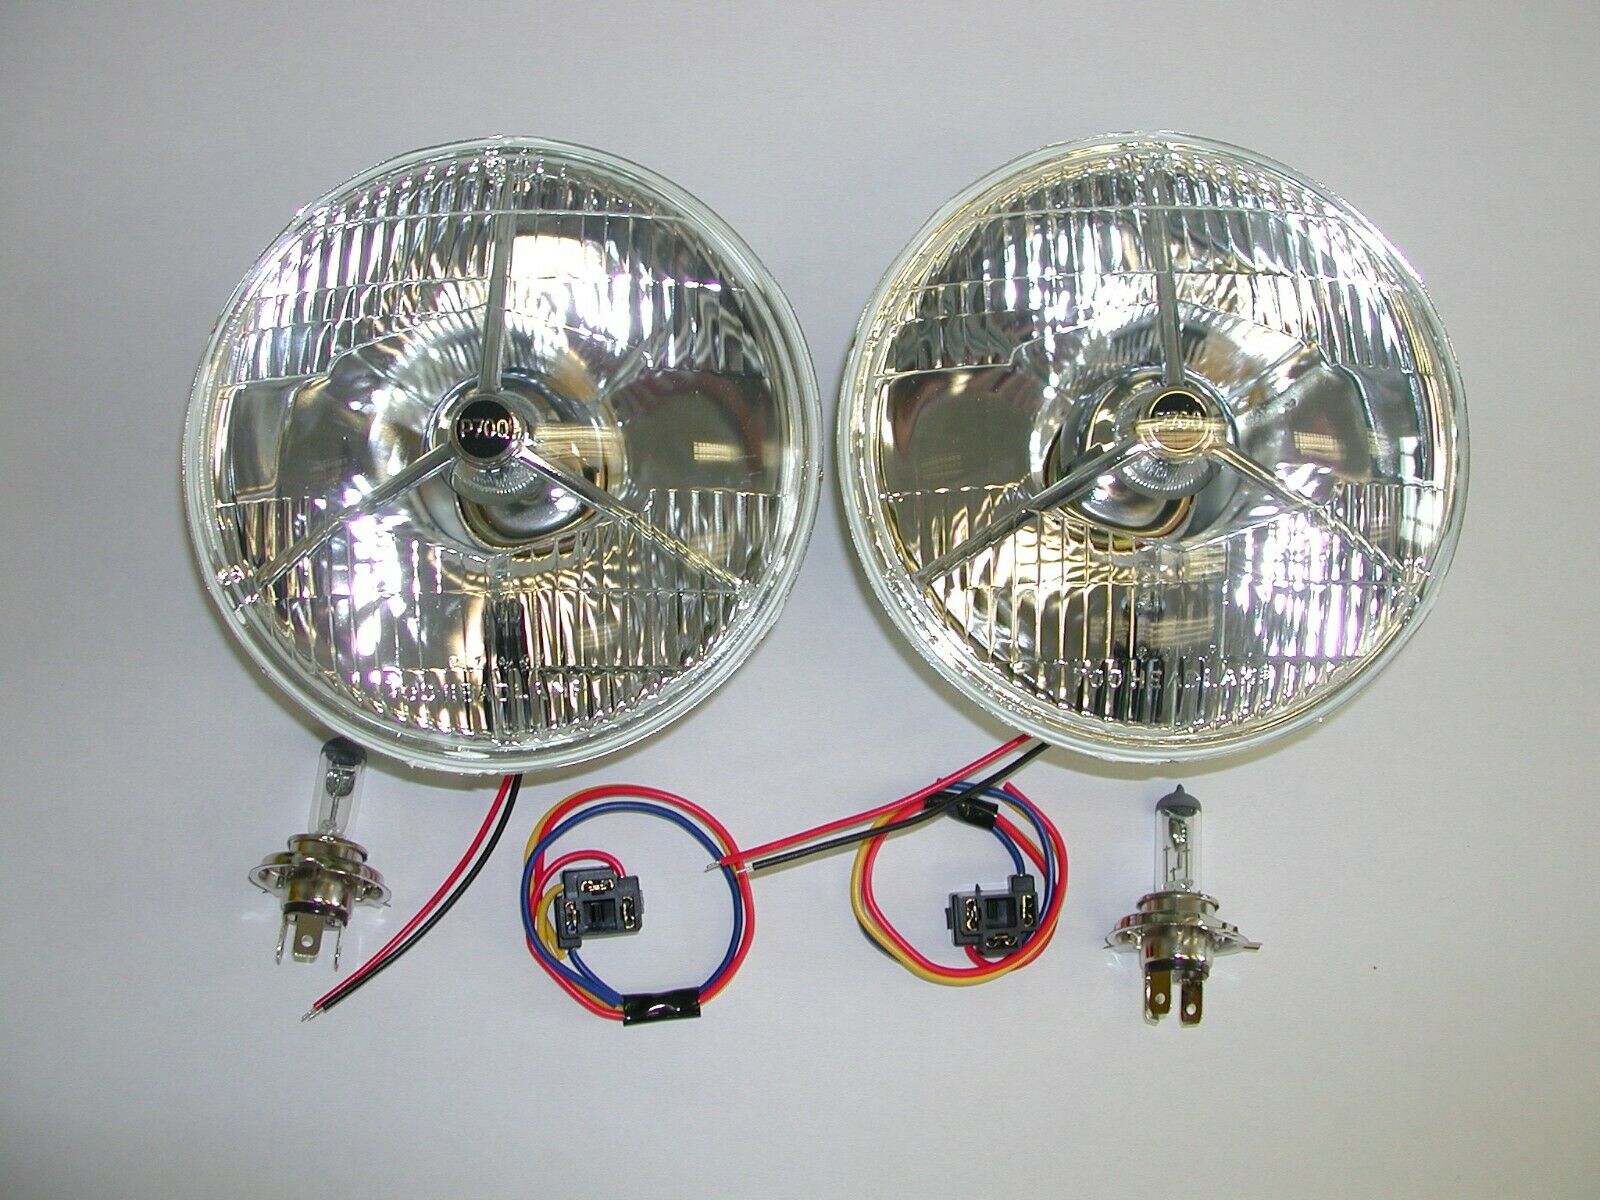 P700 'Tripod' headlamps with integral sidelight.jpg